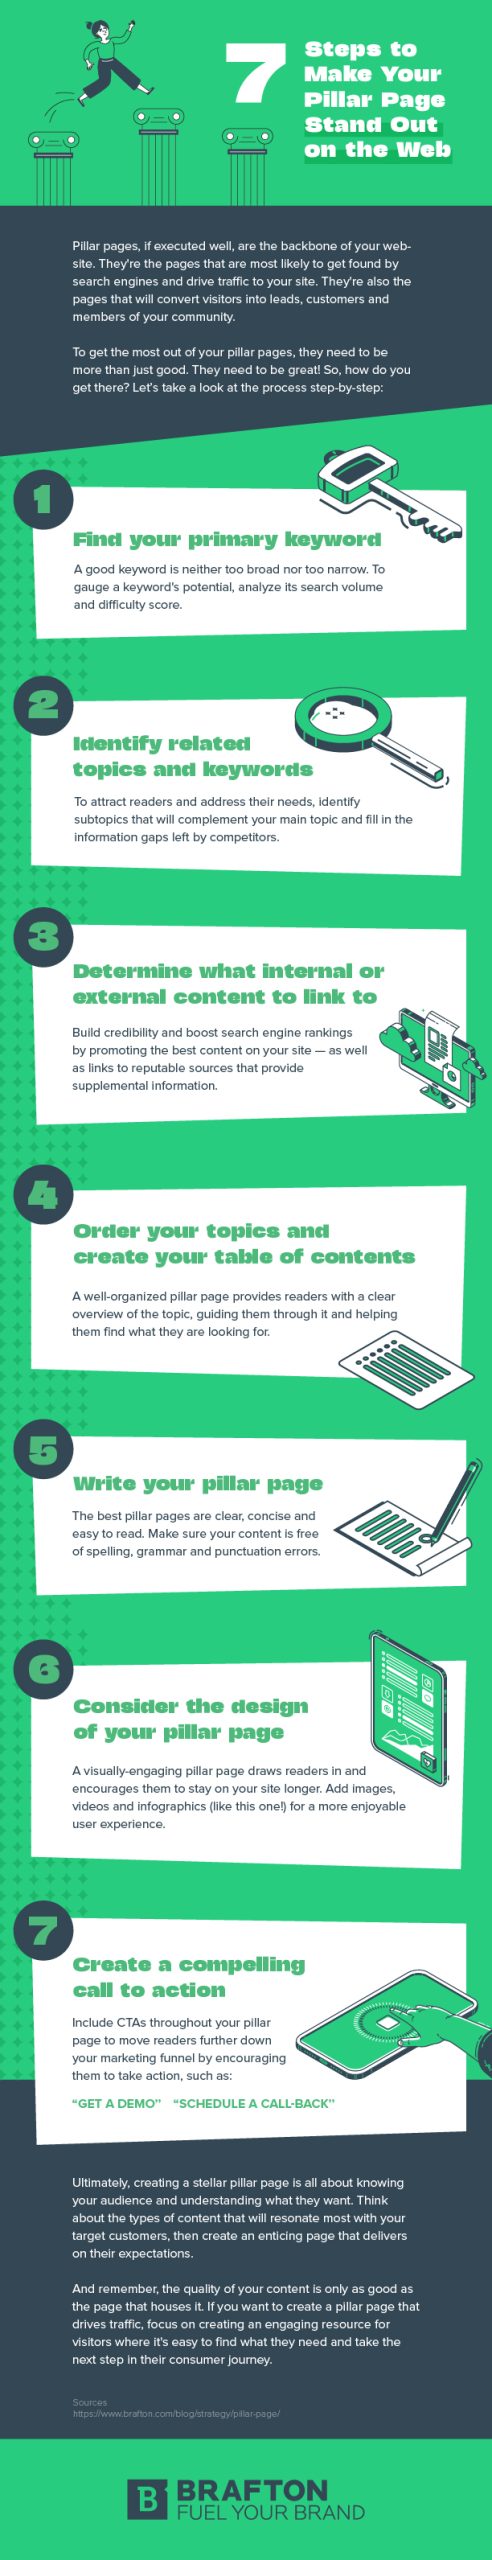 How To Create a Pillar Page That Drives Tons of Traffic Infographic